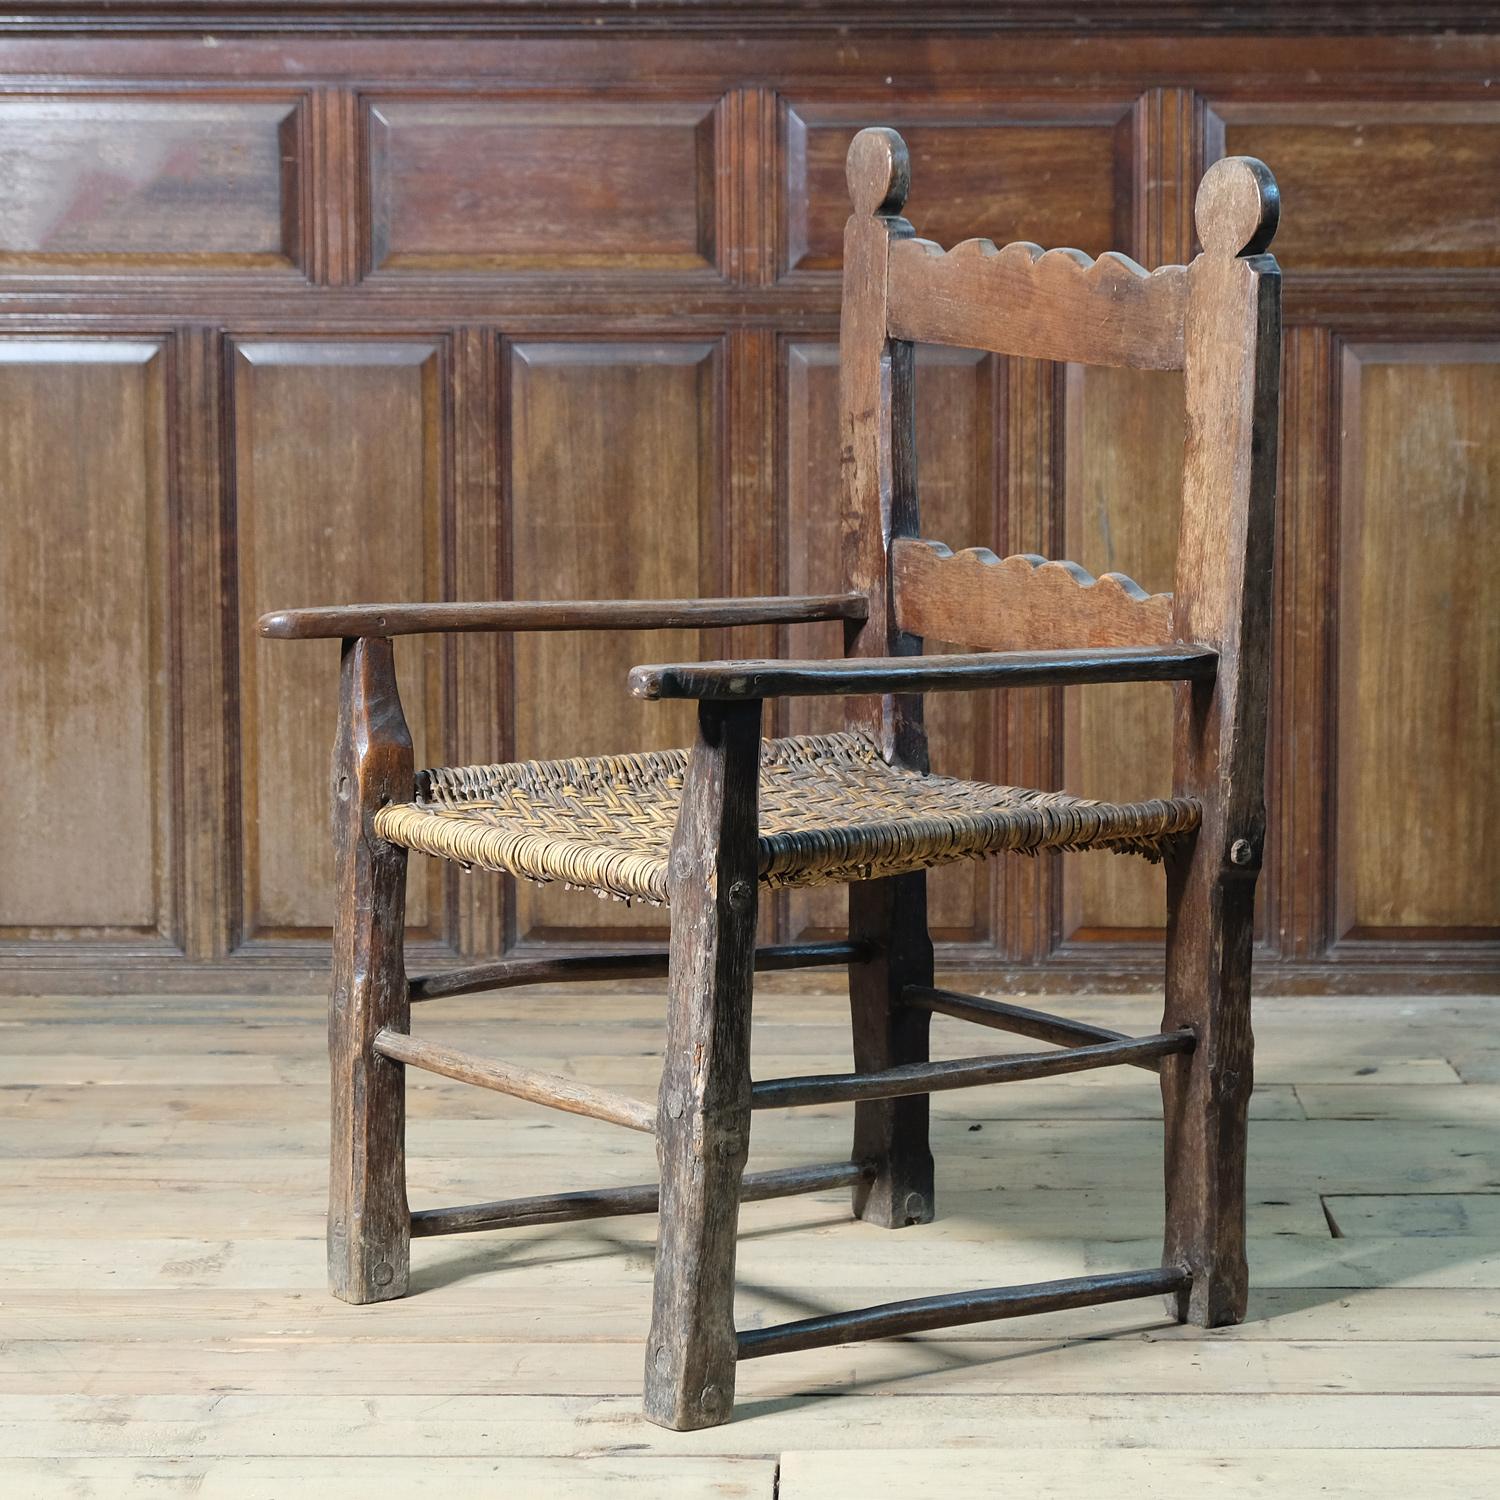 An exceptional rustic folk art chair in oak with a woven seat. In untouched condition, it has endless charm and character. Large size but not too dominating. Very similar in construction to the popular Irish sugan chair, but this example is likely